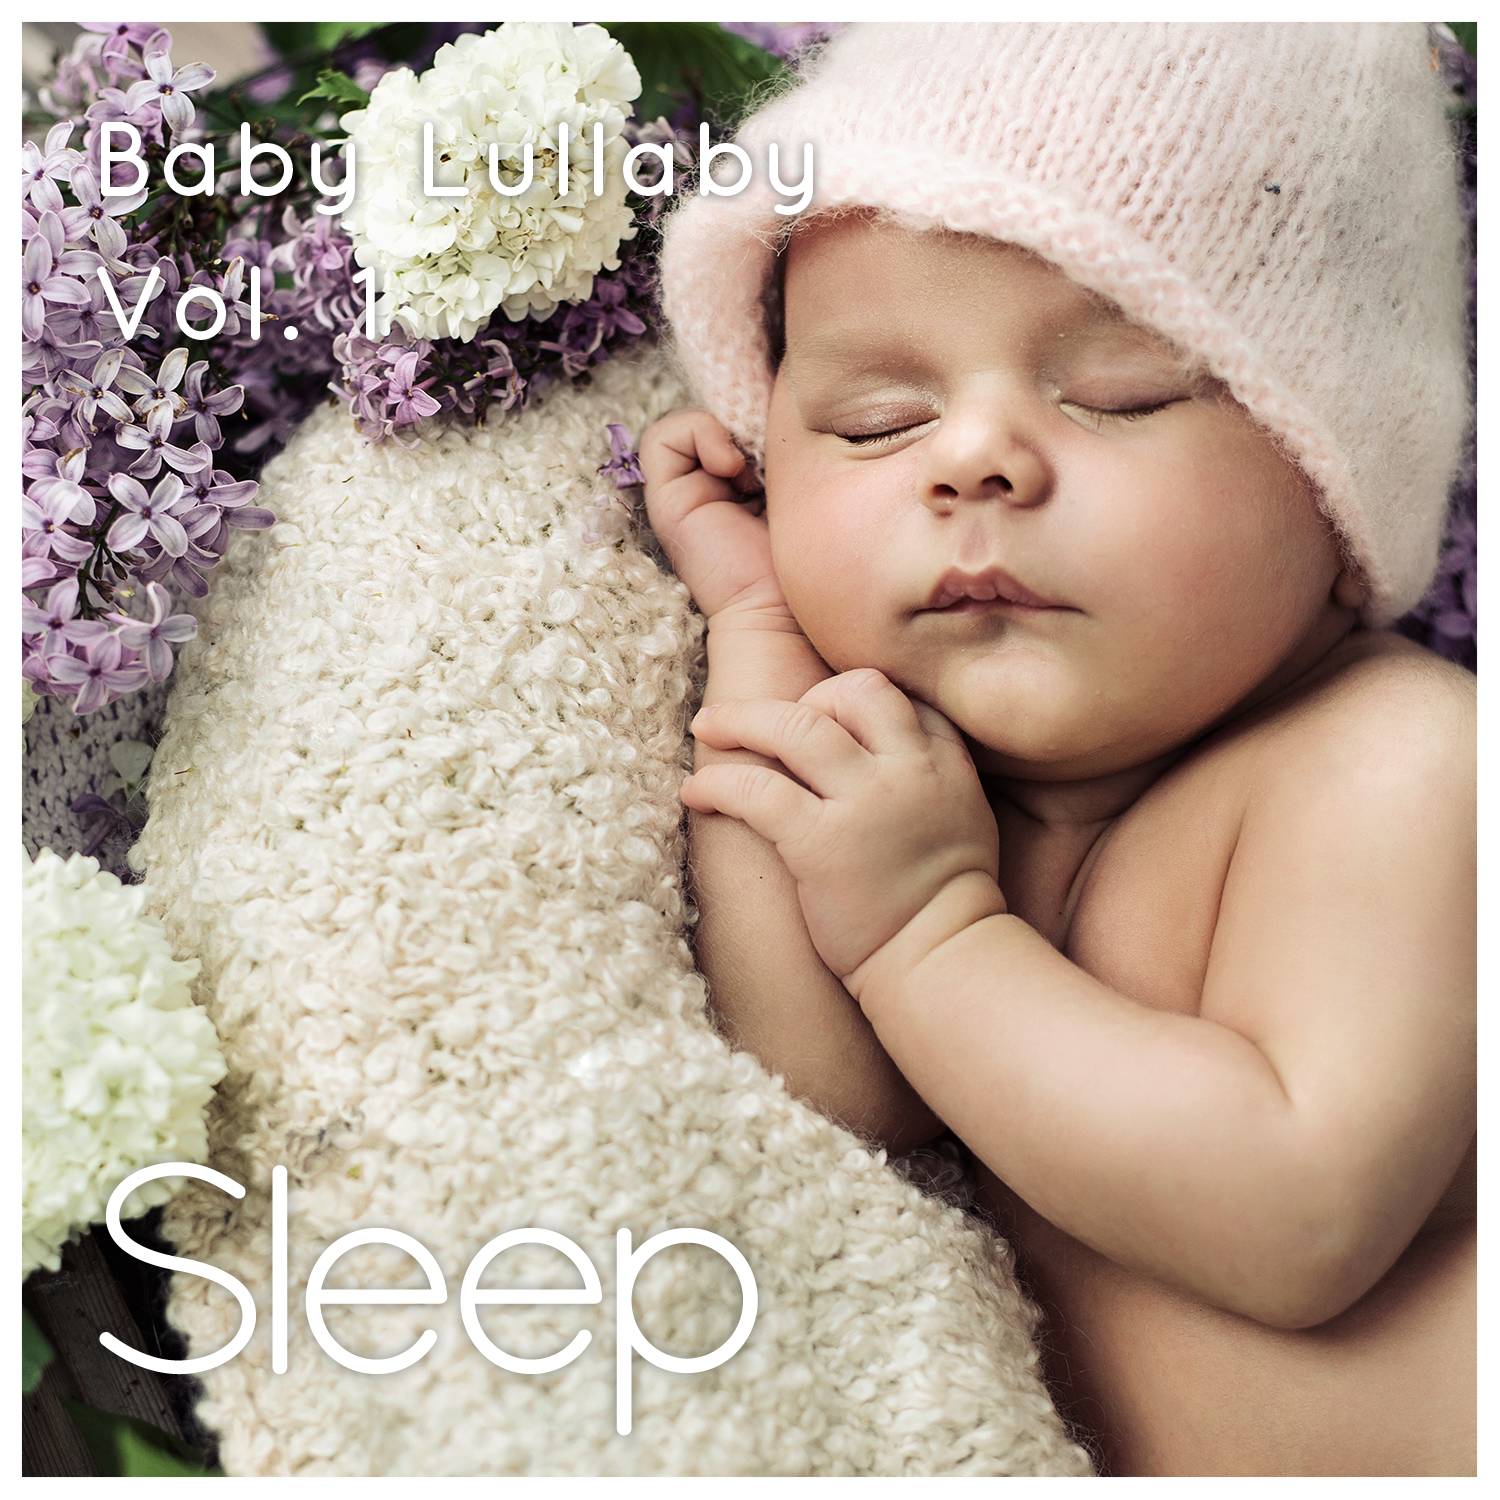 Baby Sleep Ambient Lullaby, Pt. 1